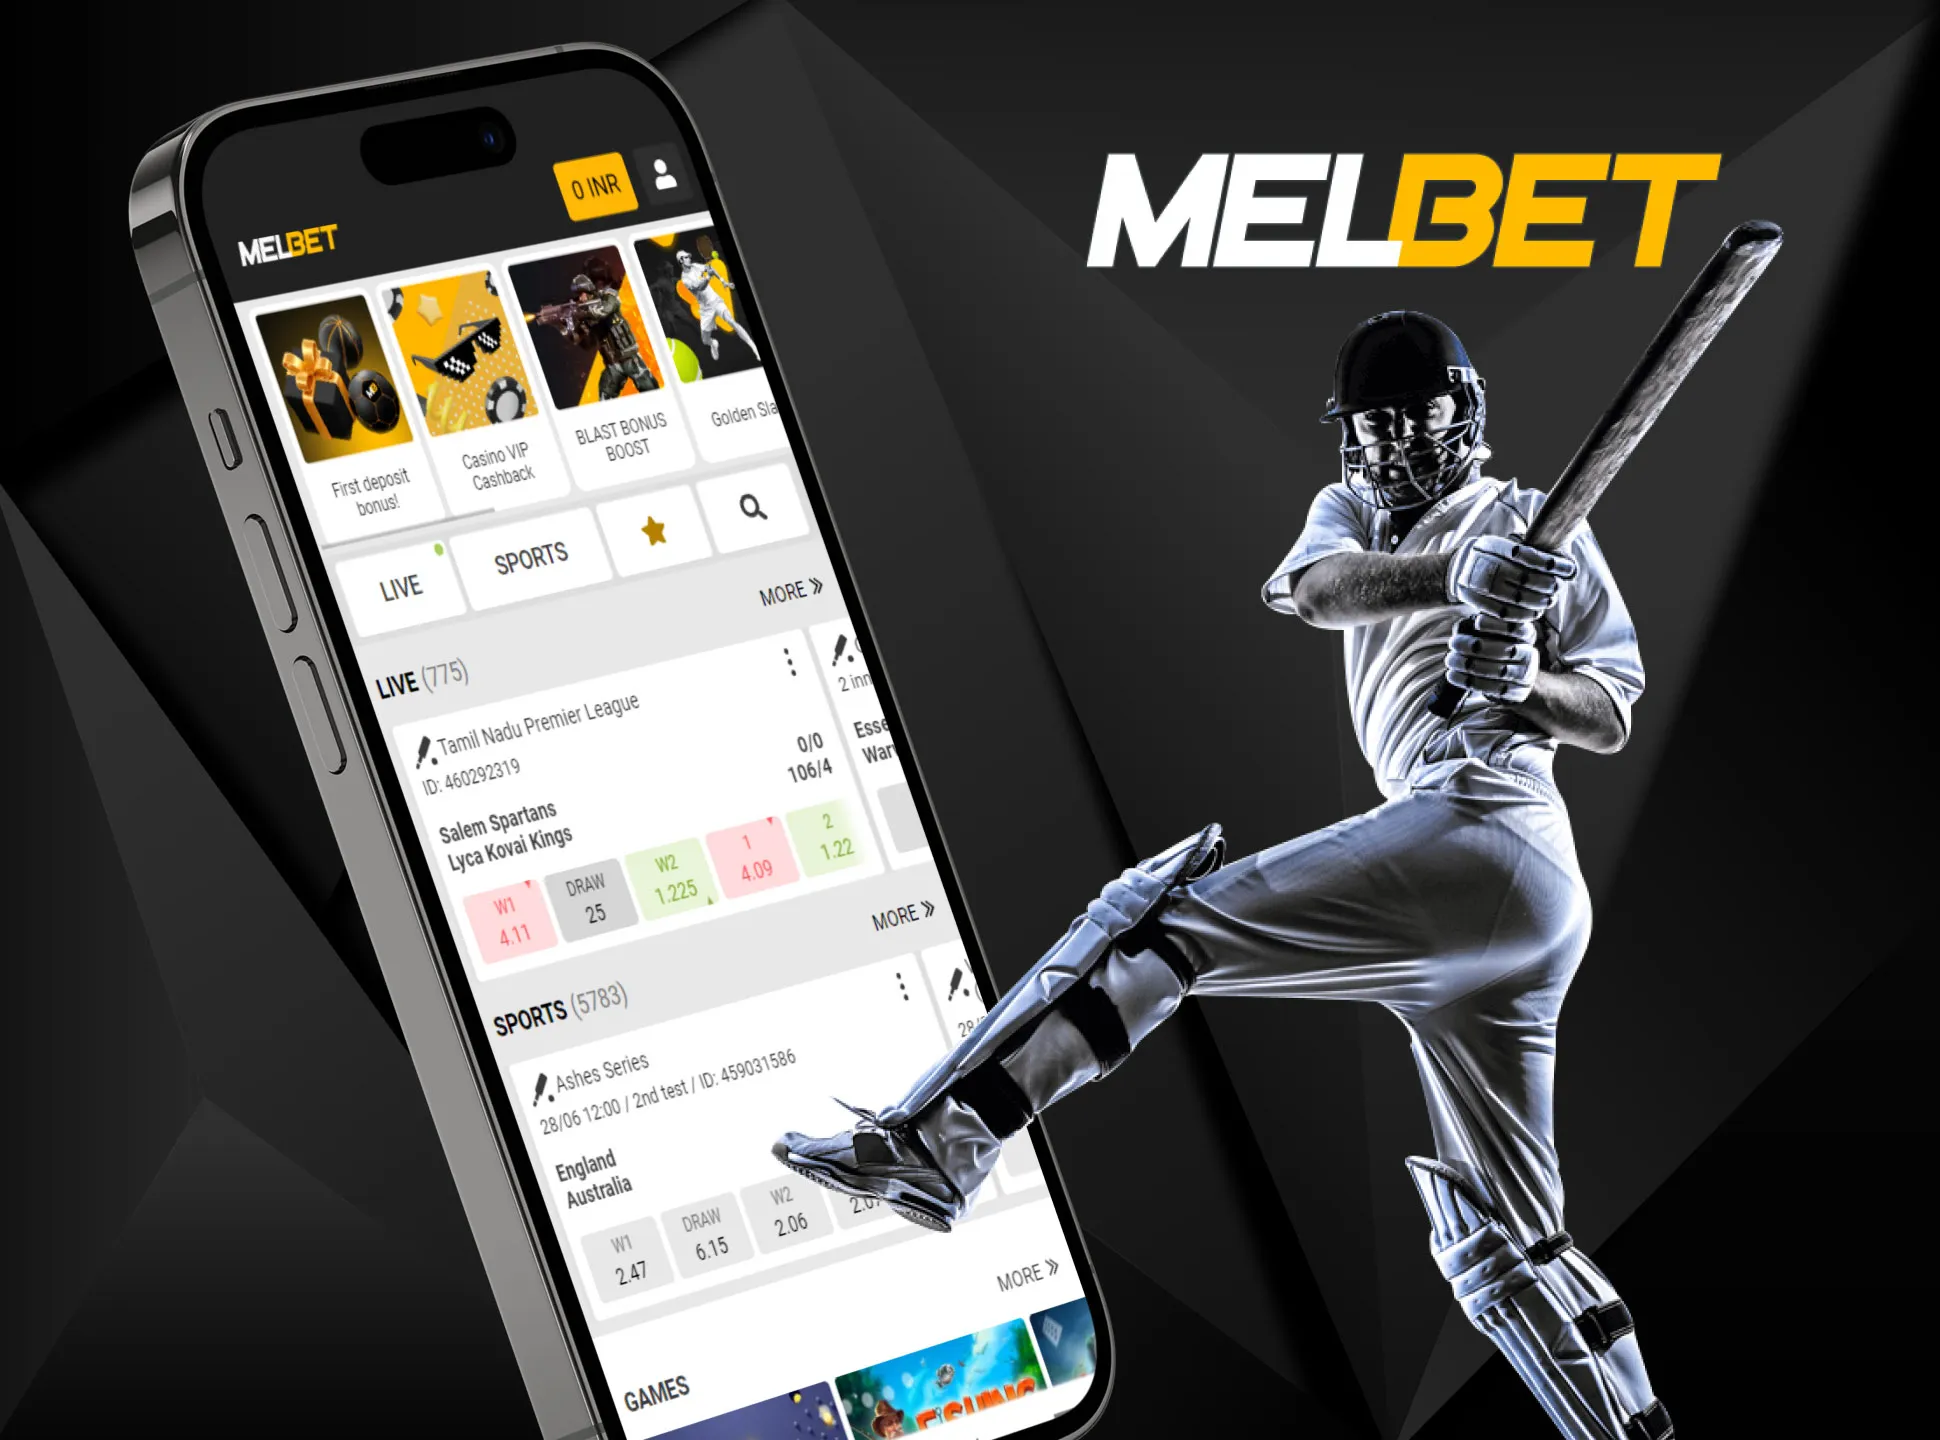 Download the Melbet app to bet on real money.